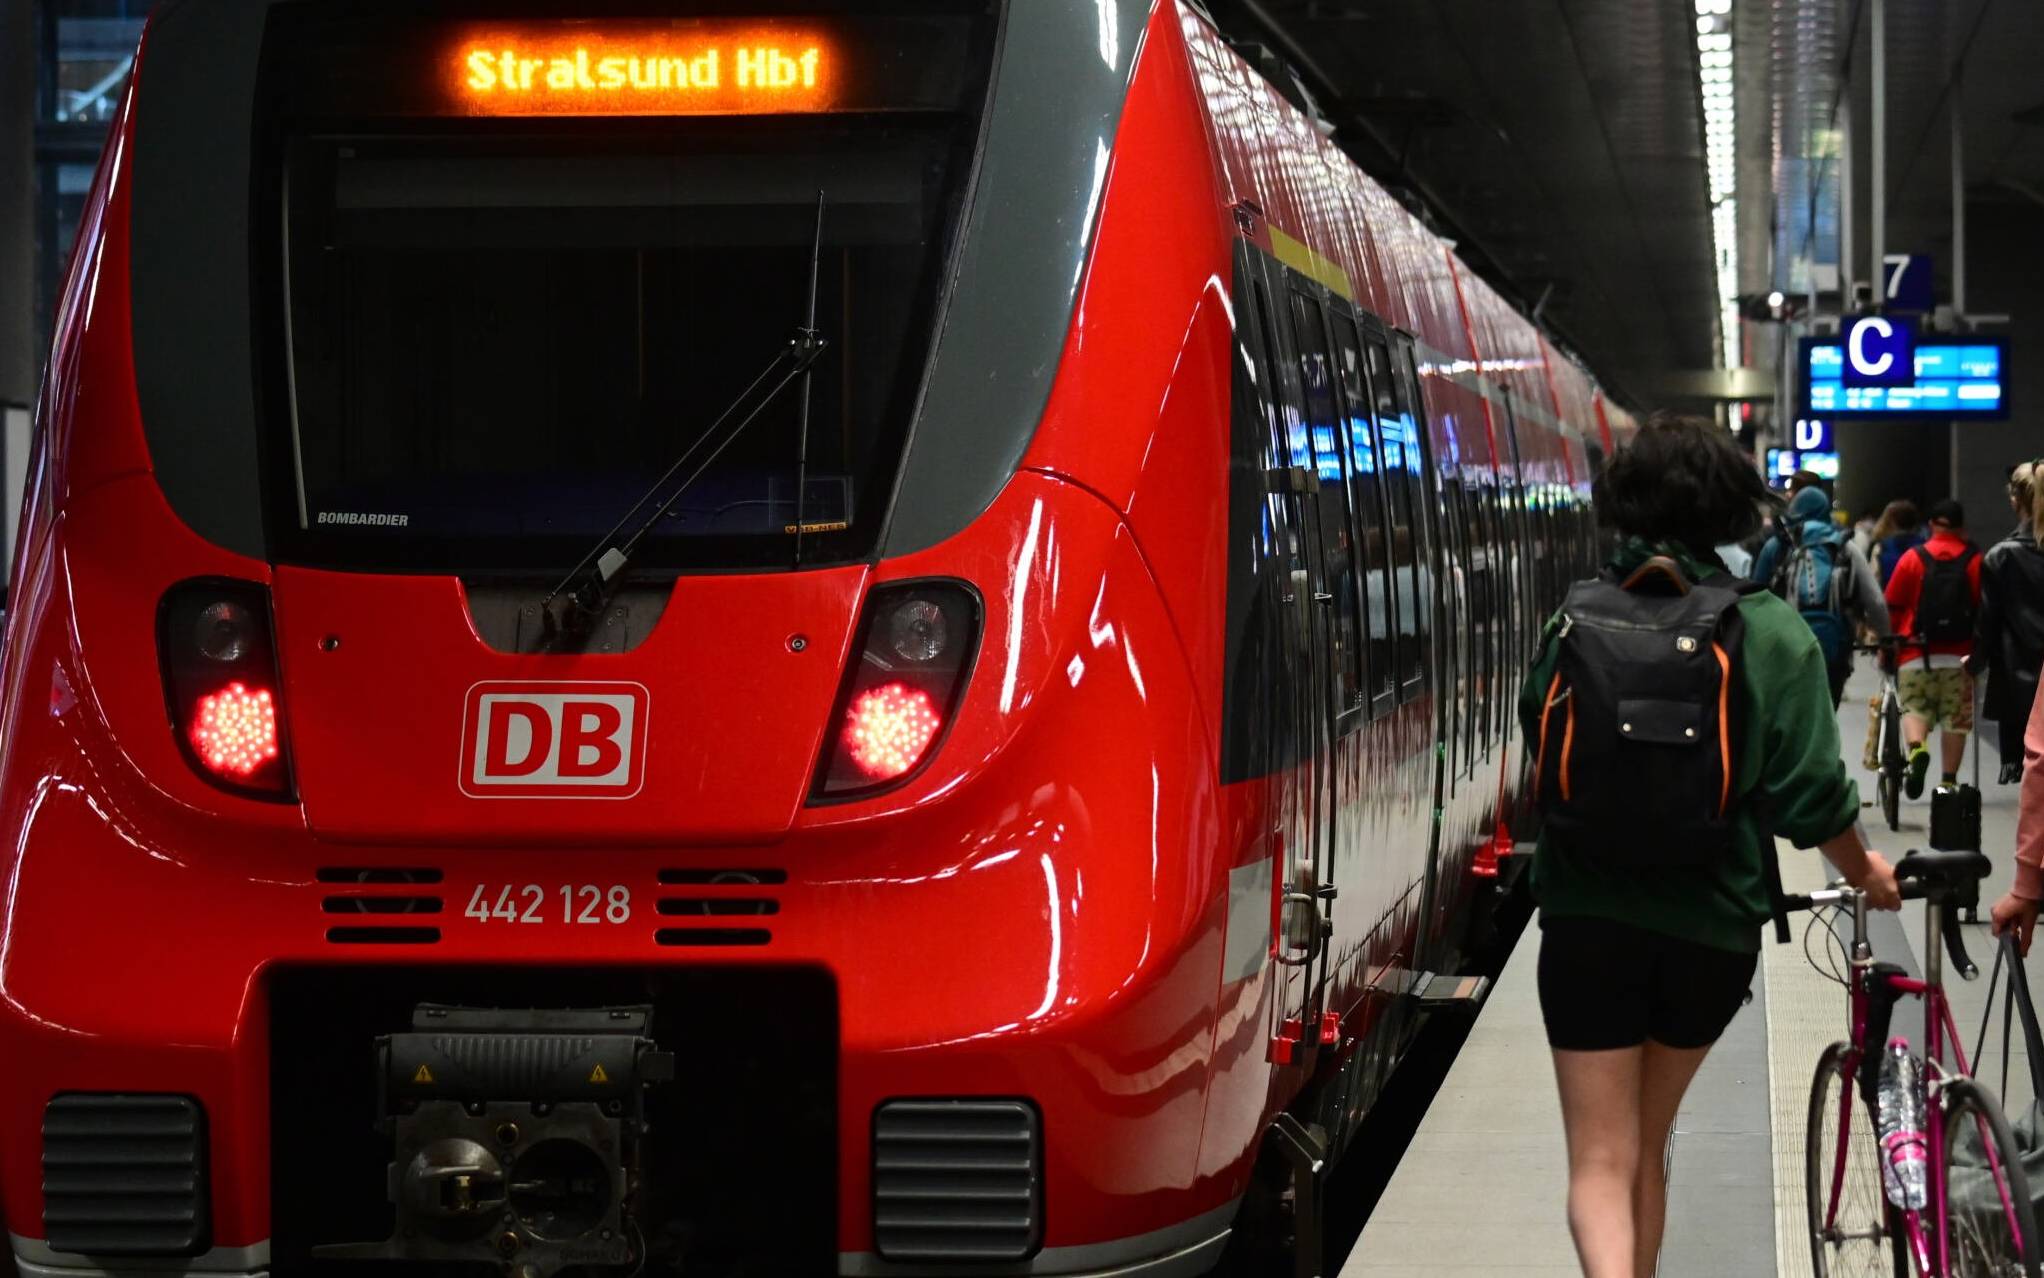 Travellers board a regional train to the northeastern Germany city of Stralsund at Berlin Central Station (Hauptbahnhof) in Berlin on June 4, 2022. - On June 1, 2022, commuters began paying just nine euros (USD 9.60) a month for public transport as an inflation-relief measure in Europe's biggest economy. (Photo by Tobias SCHWARZ / AFP)